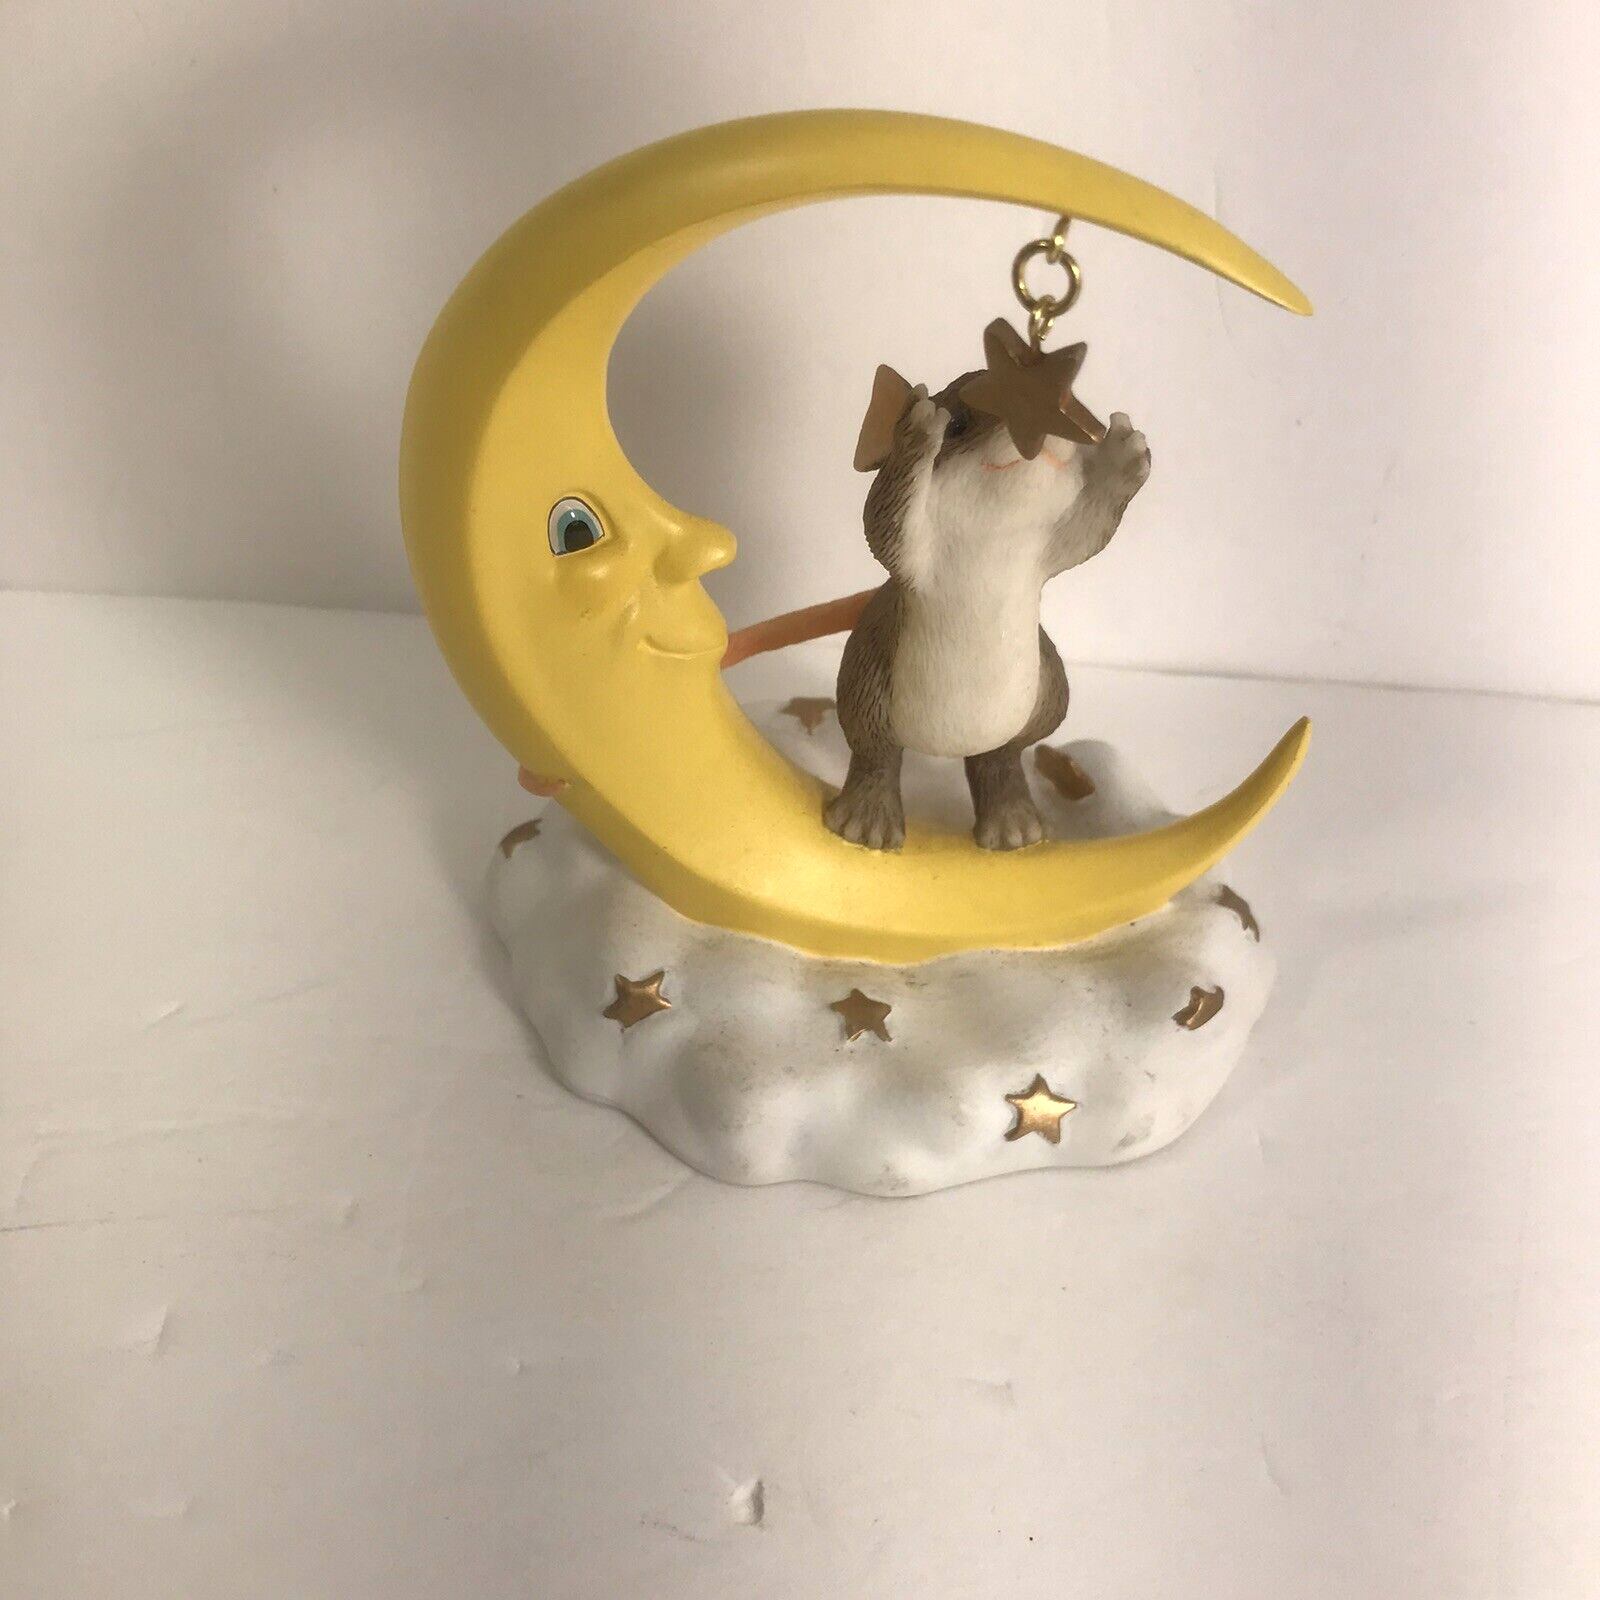 Fitz & Floyd Charming Tails “Reach For The Stars”Mouse Moon Star Cloud Figurine